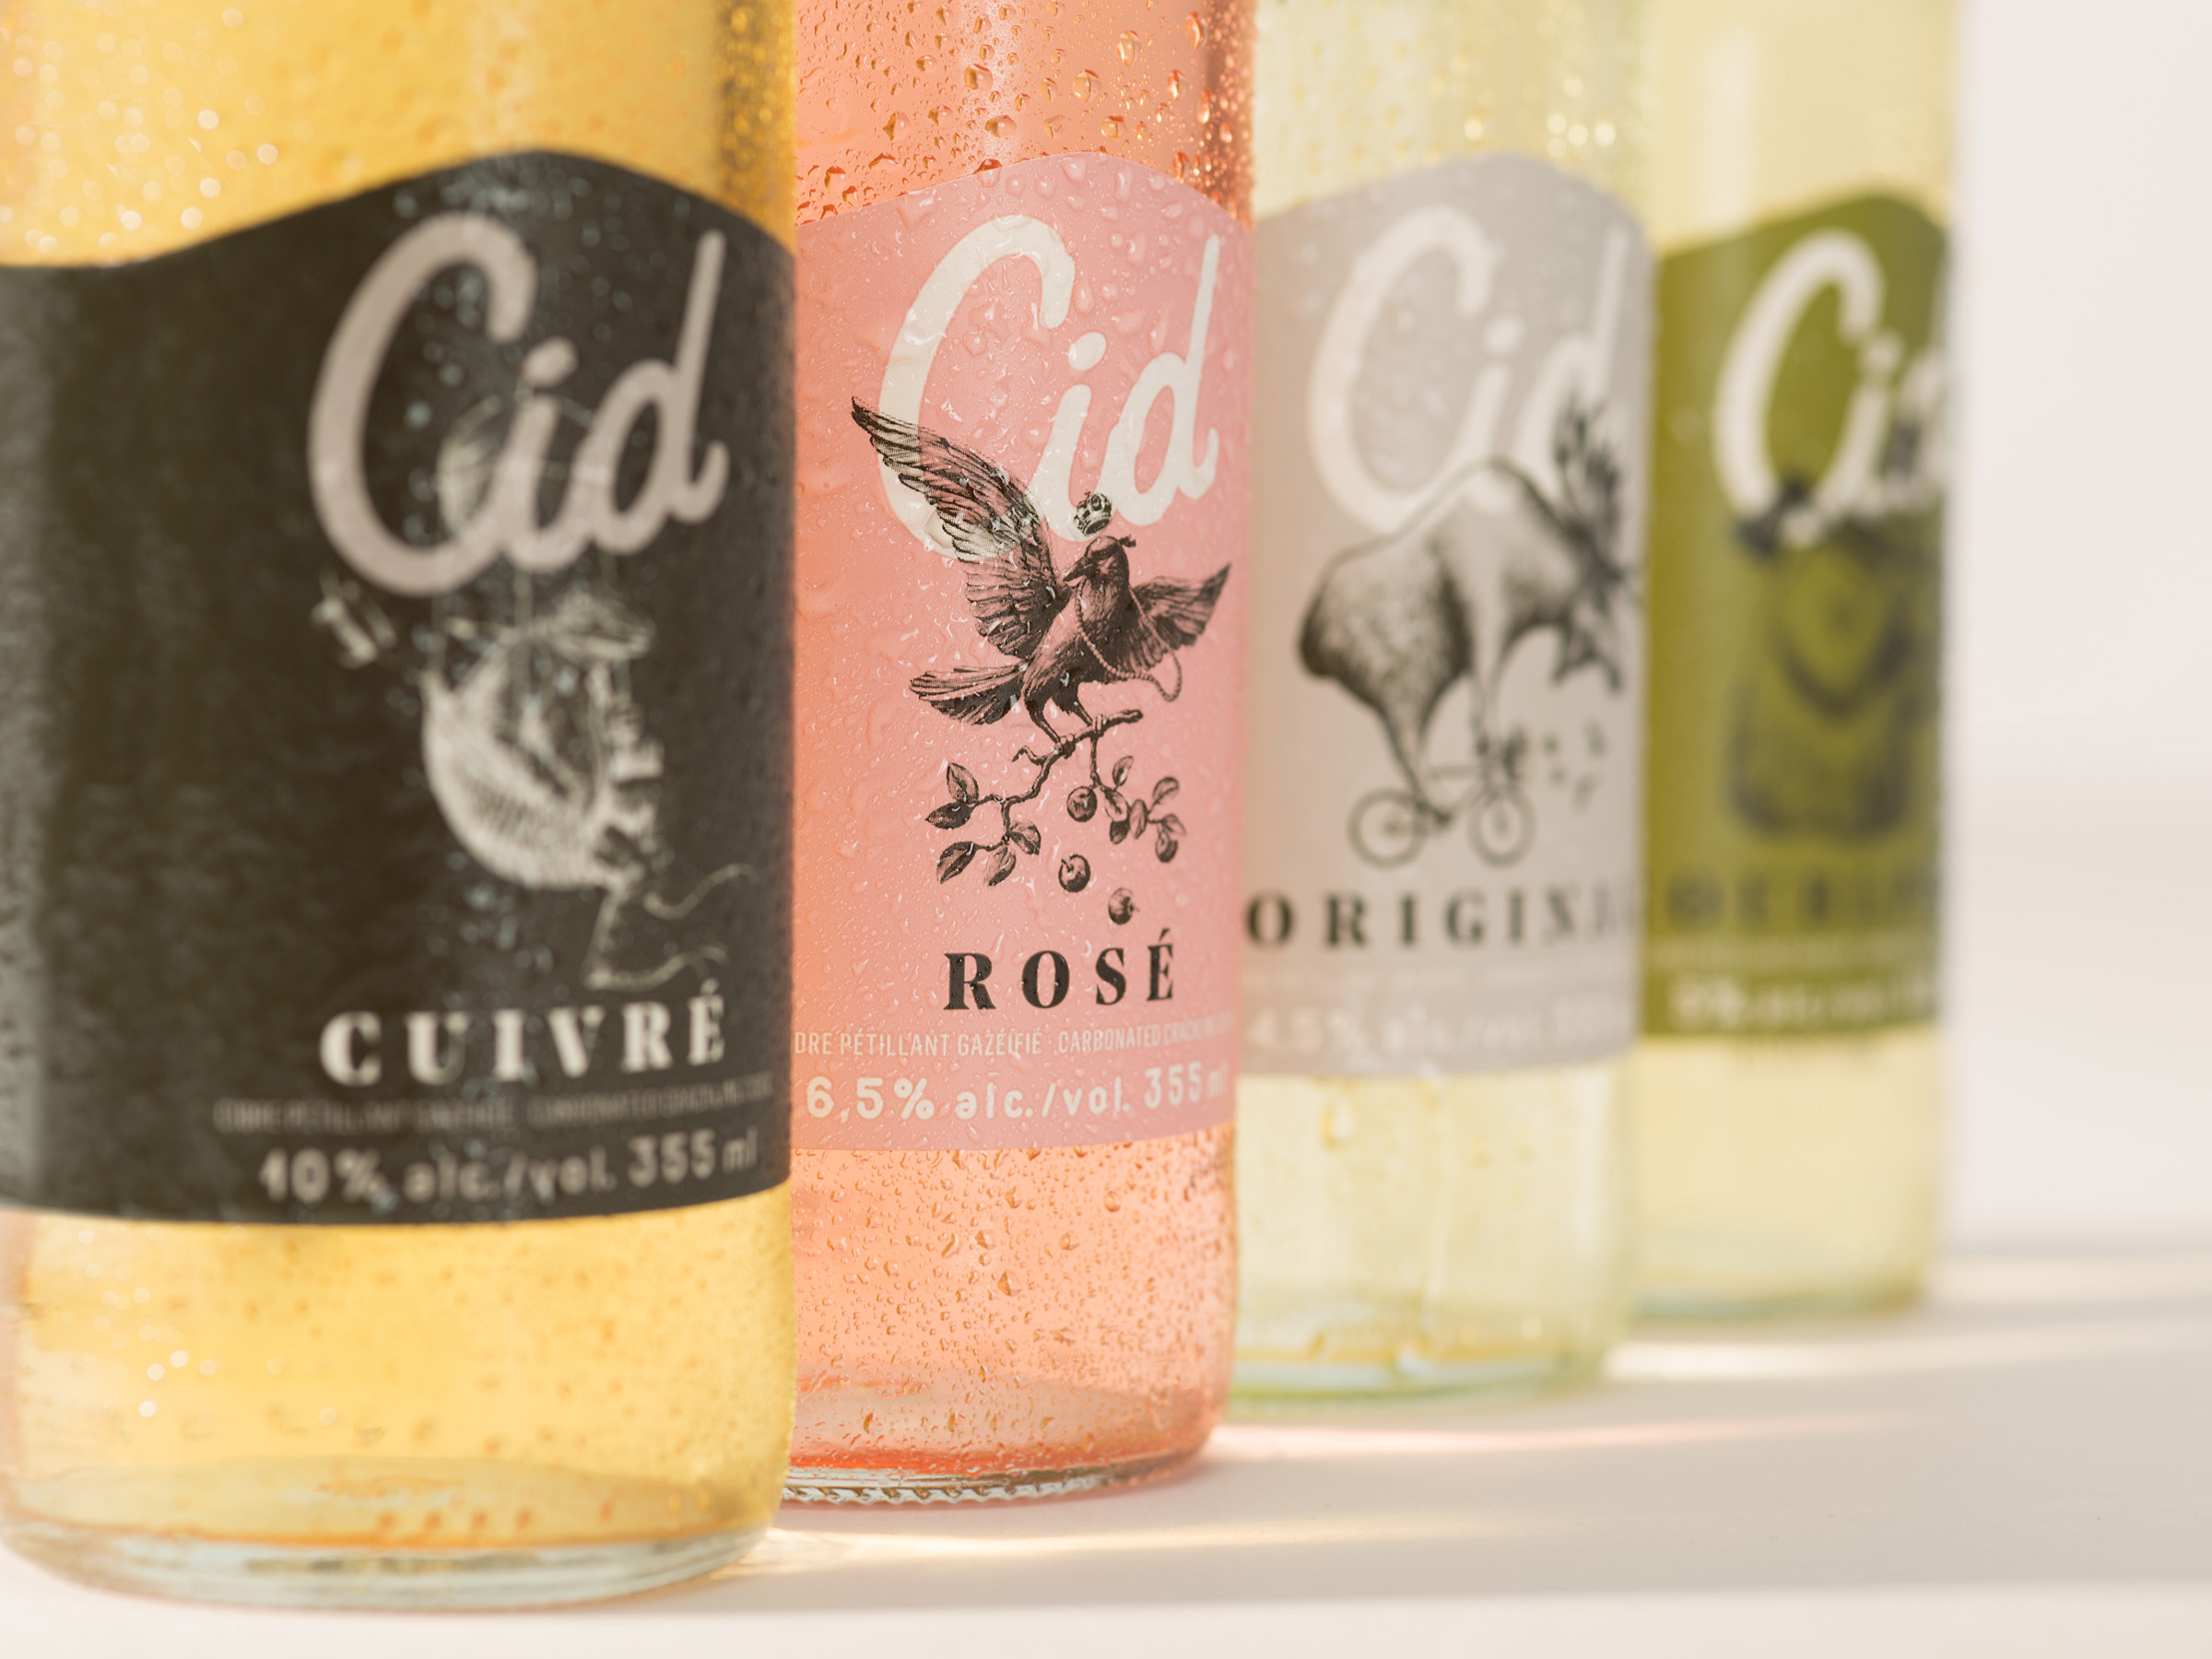 Cid is the Cider Where Classy Meets Fun